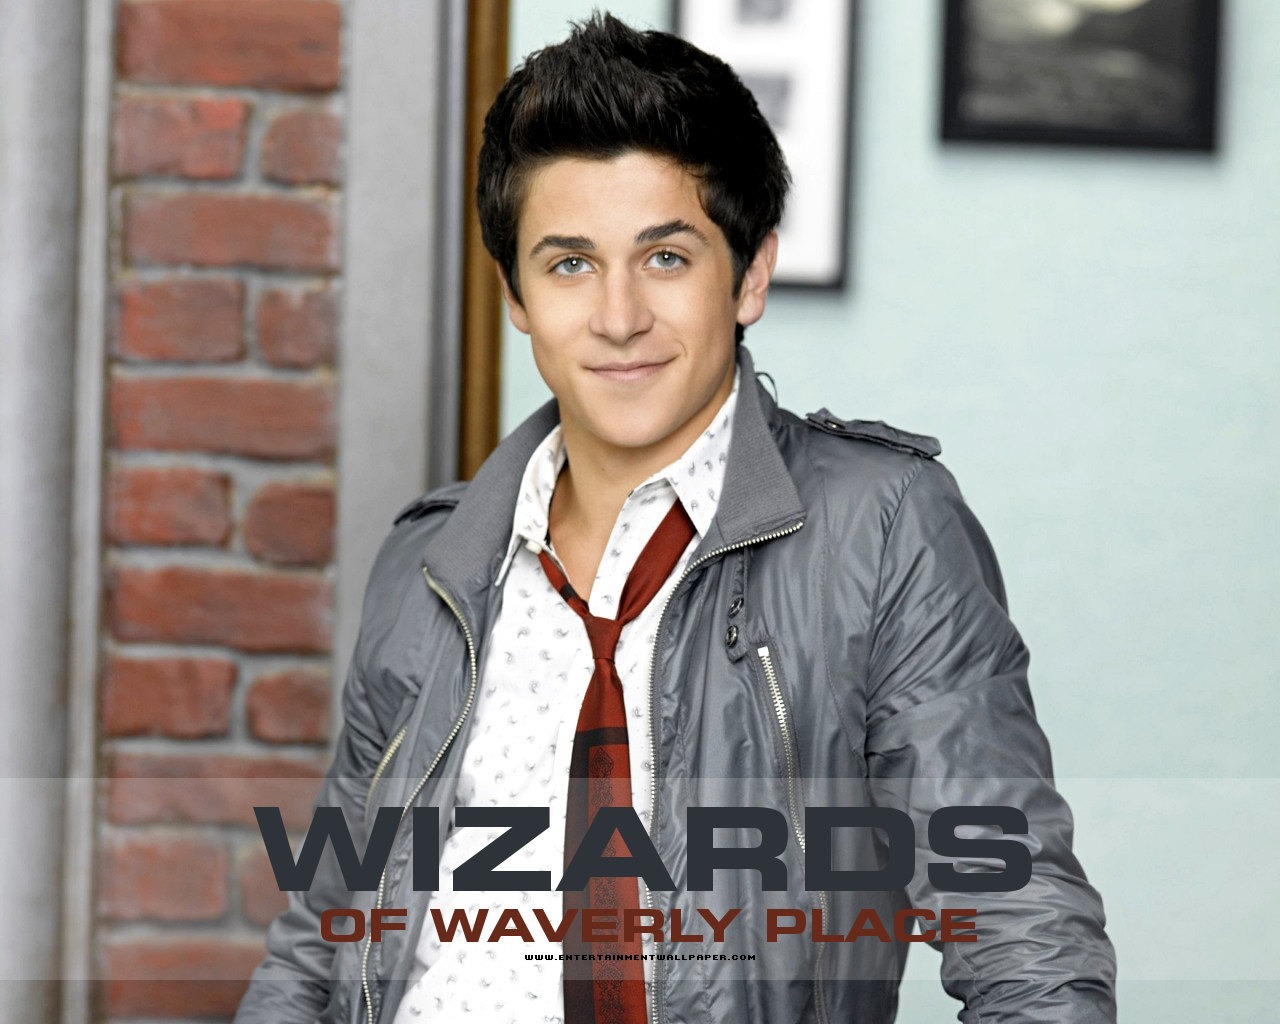 Wizards of Waverly Place 少年魔法師 #12 - 1280x1024